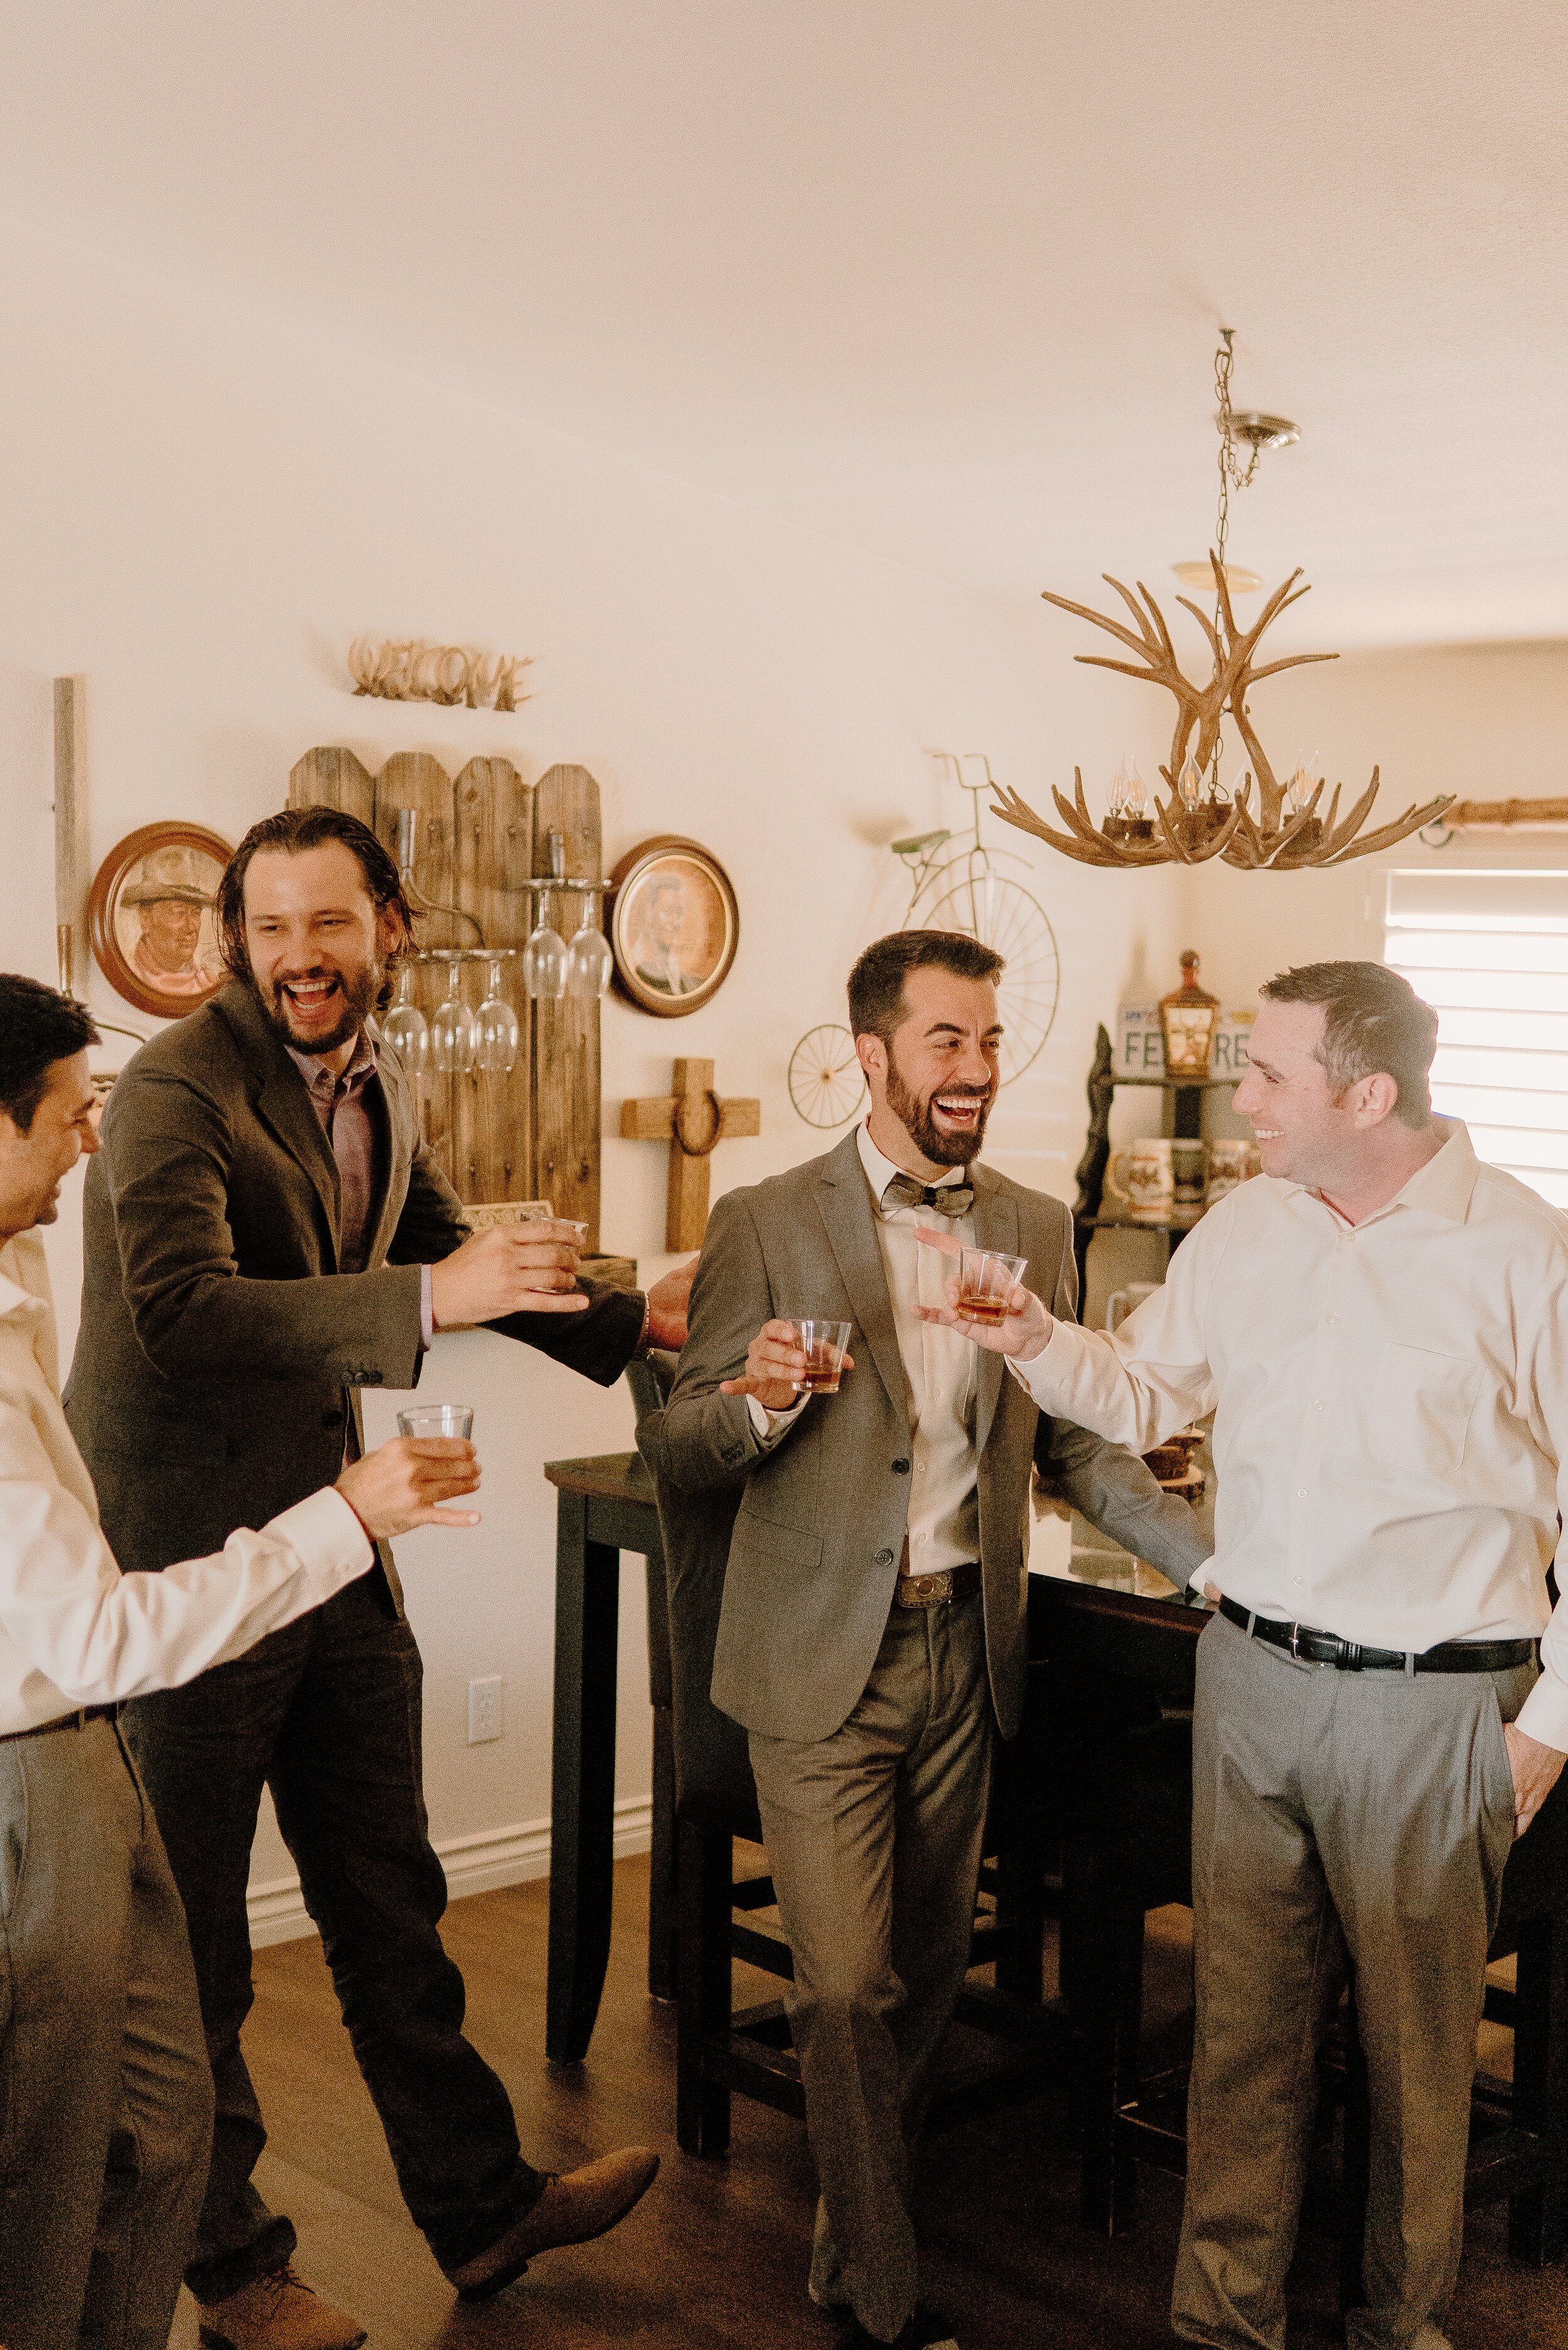 www.santabarbarawedding.com | Events by Fran | Becca Romero Creative | Unique Floral Designs | Groom Sharing a Drink with Groomsmen Before Ceremony 